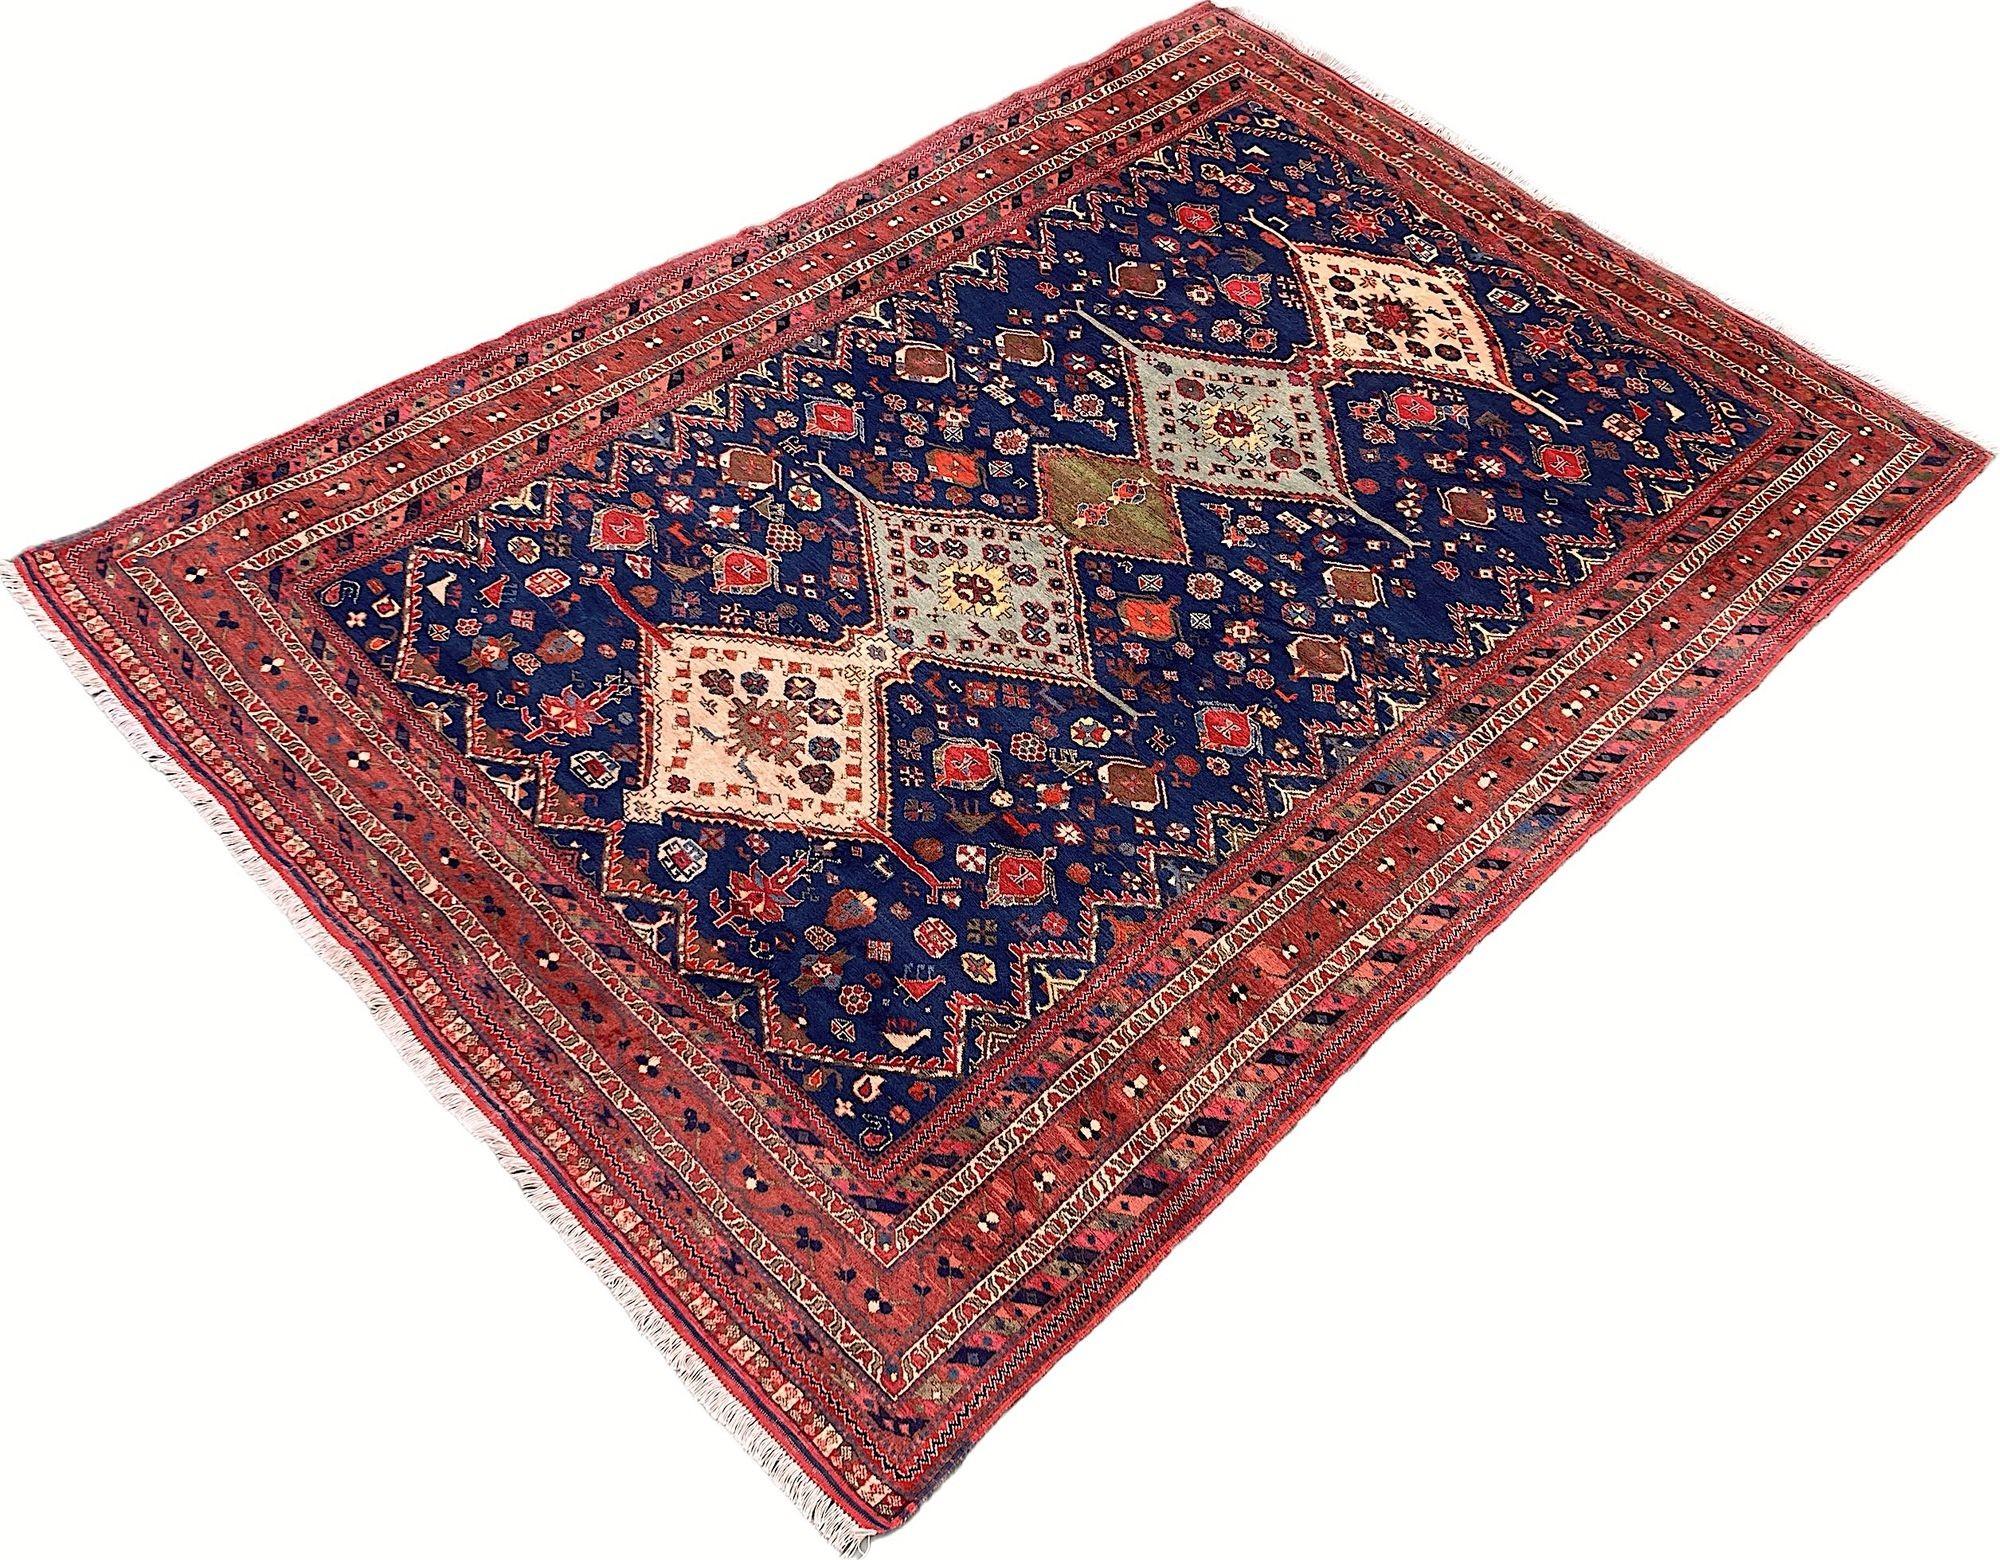 Vintage Afshar Carpet 2.92m x 2.03m In Good Condition For Sale In St. Albans, GB